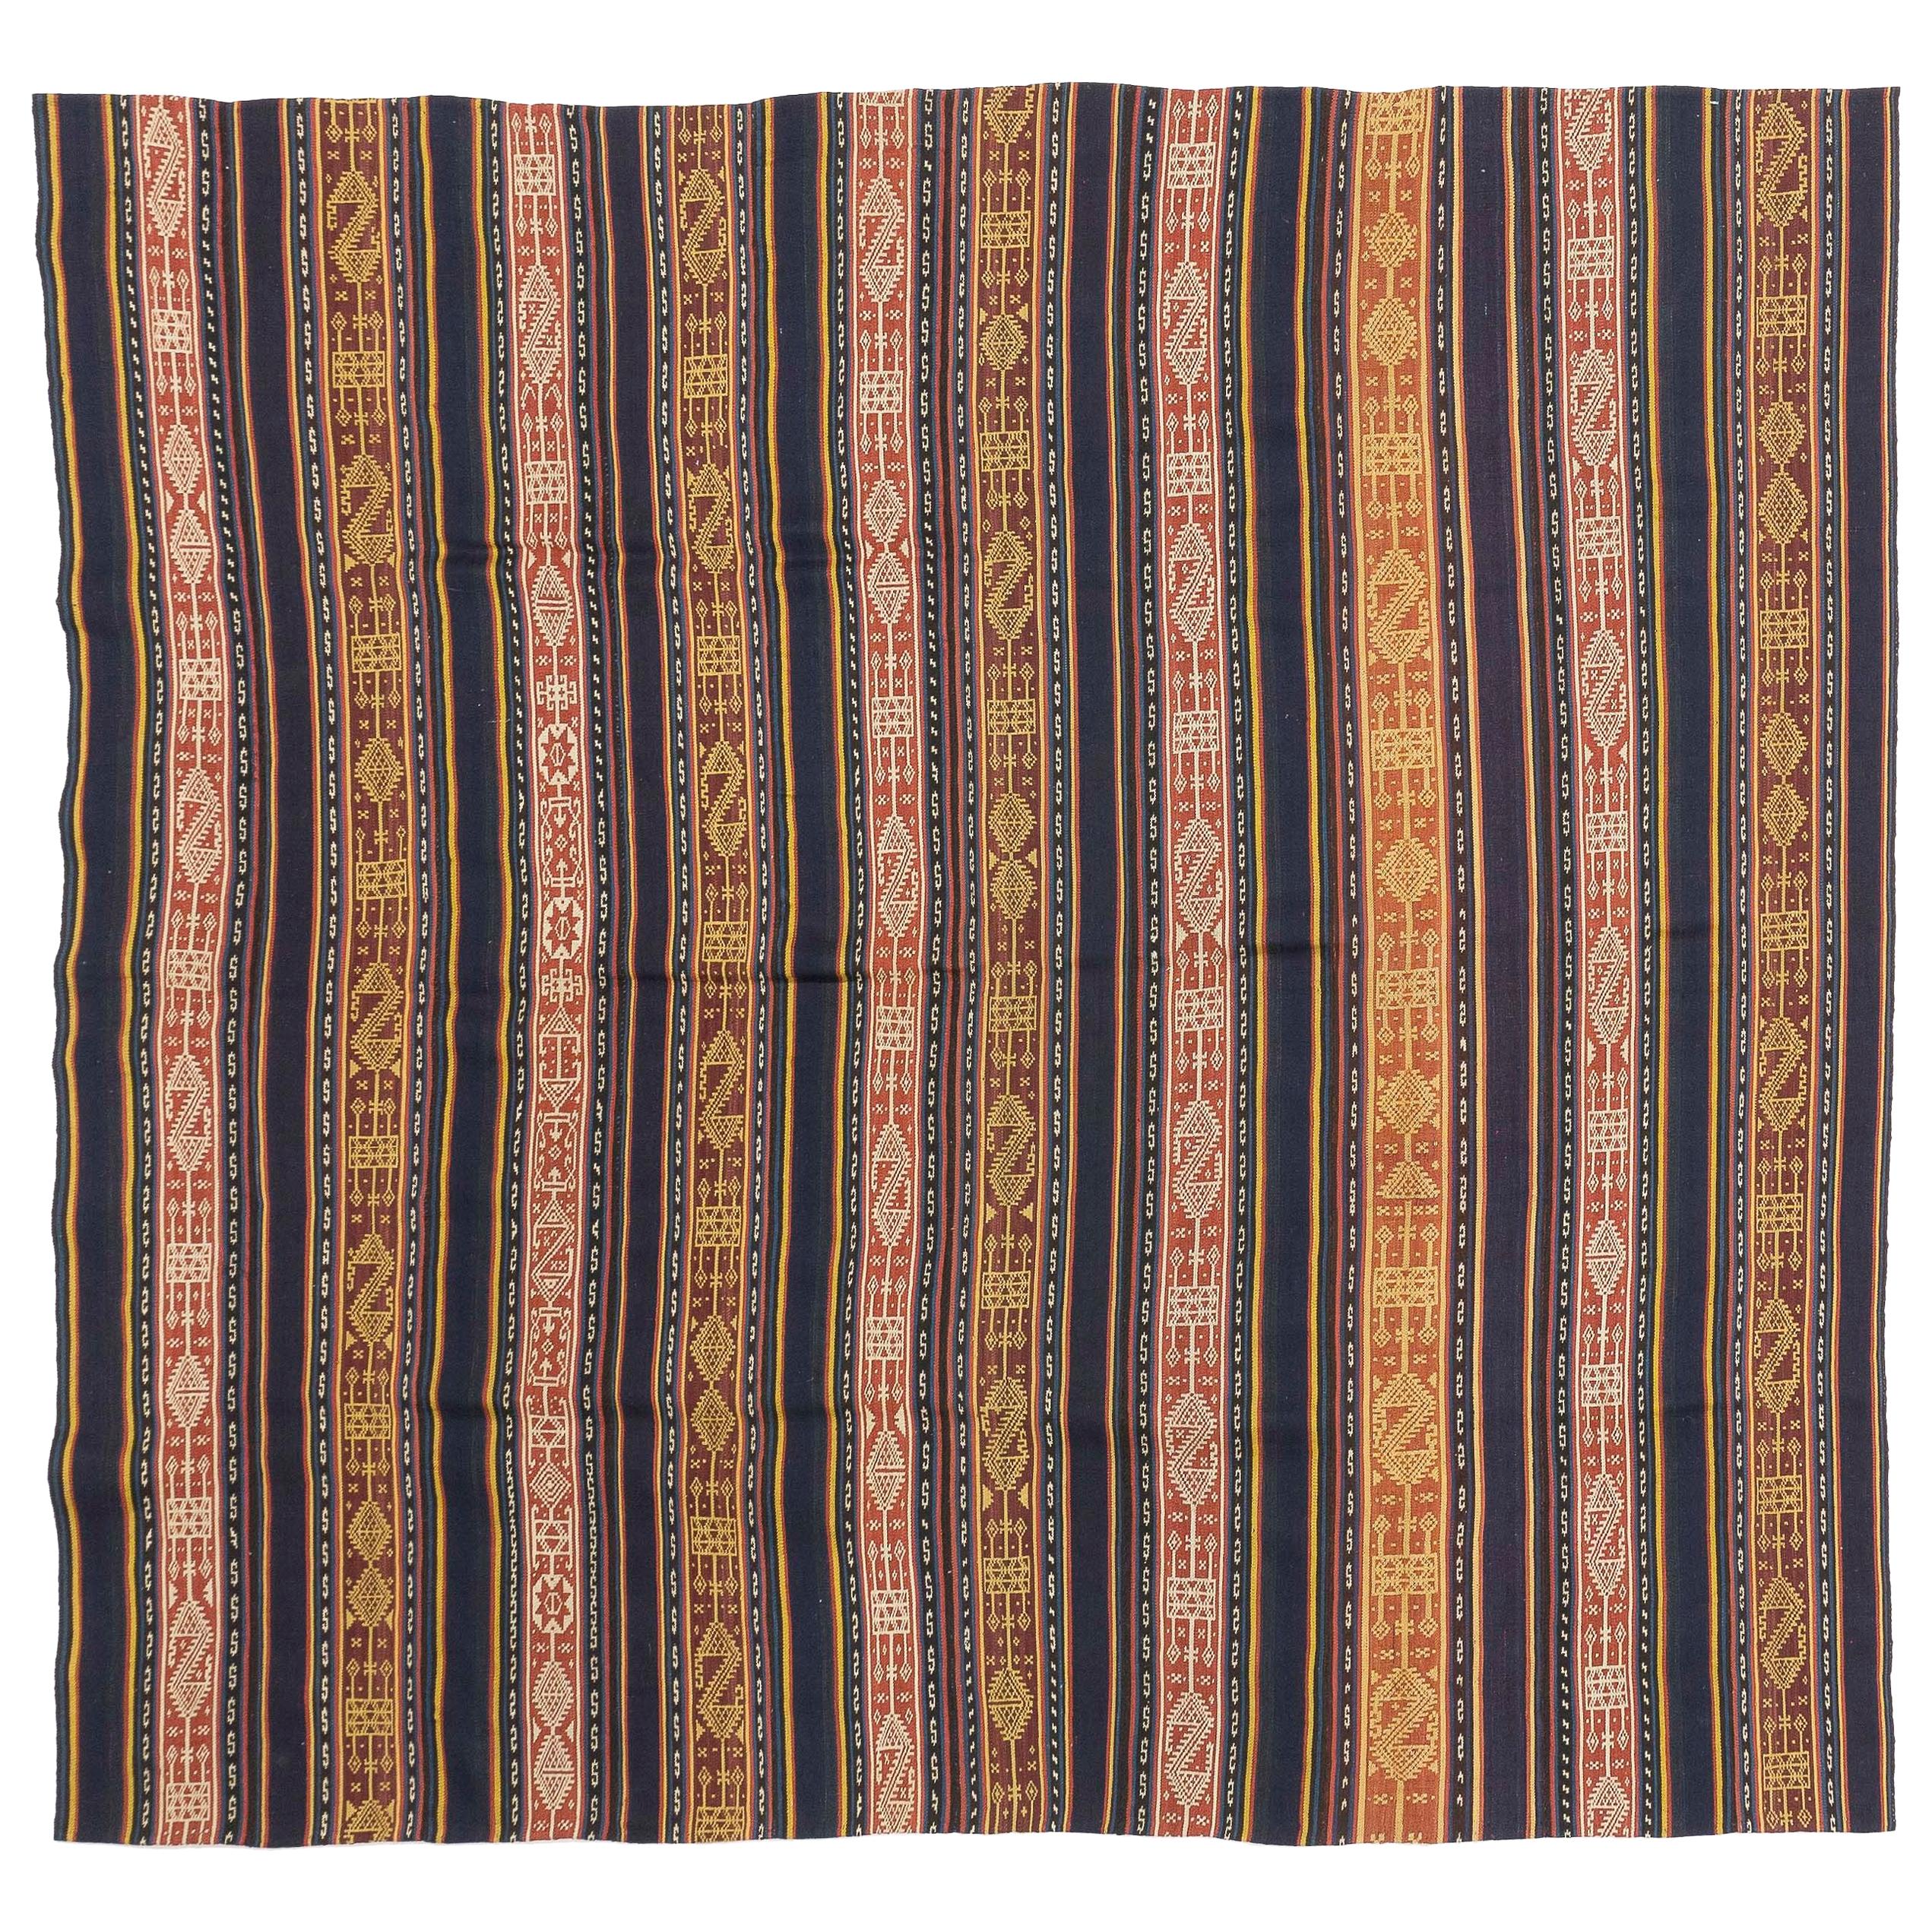 Antique Persian Flat-Weave Jajim Rug with Geometric Details and Colored Stripes